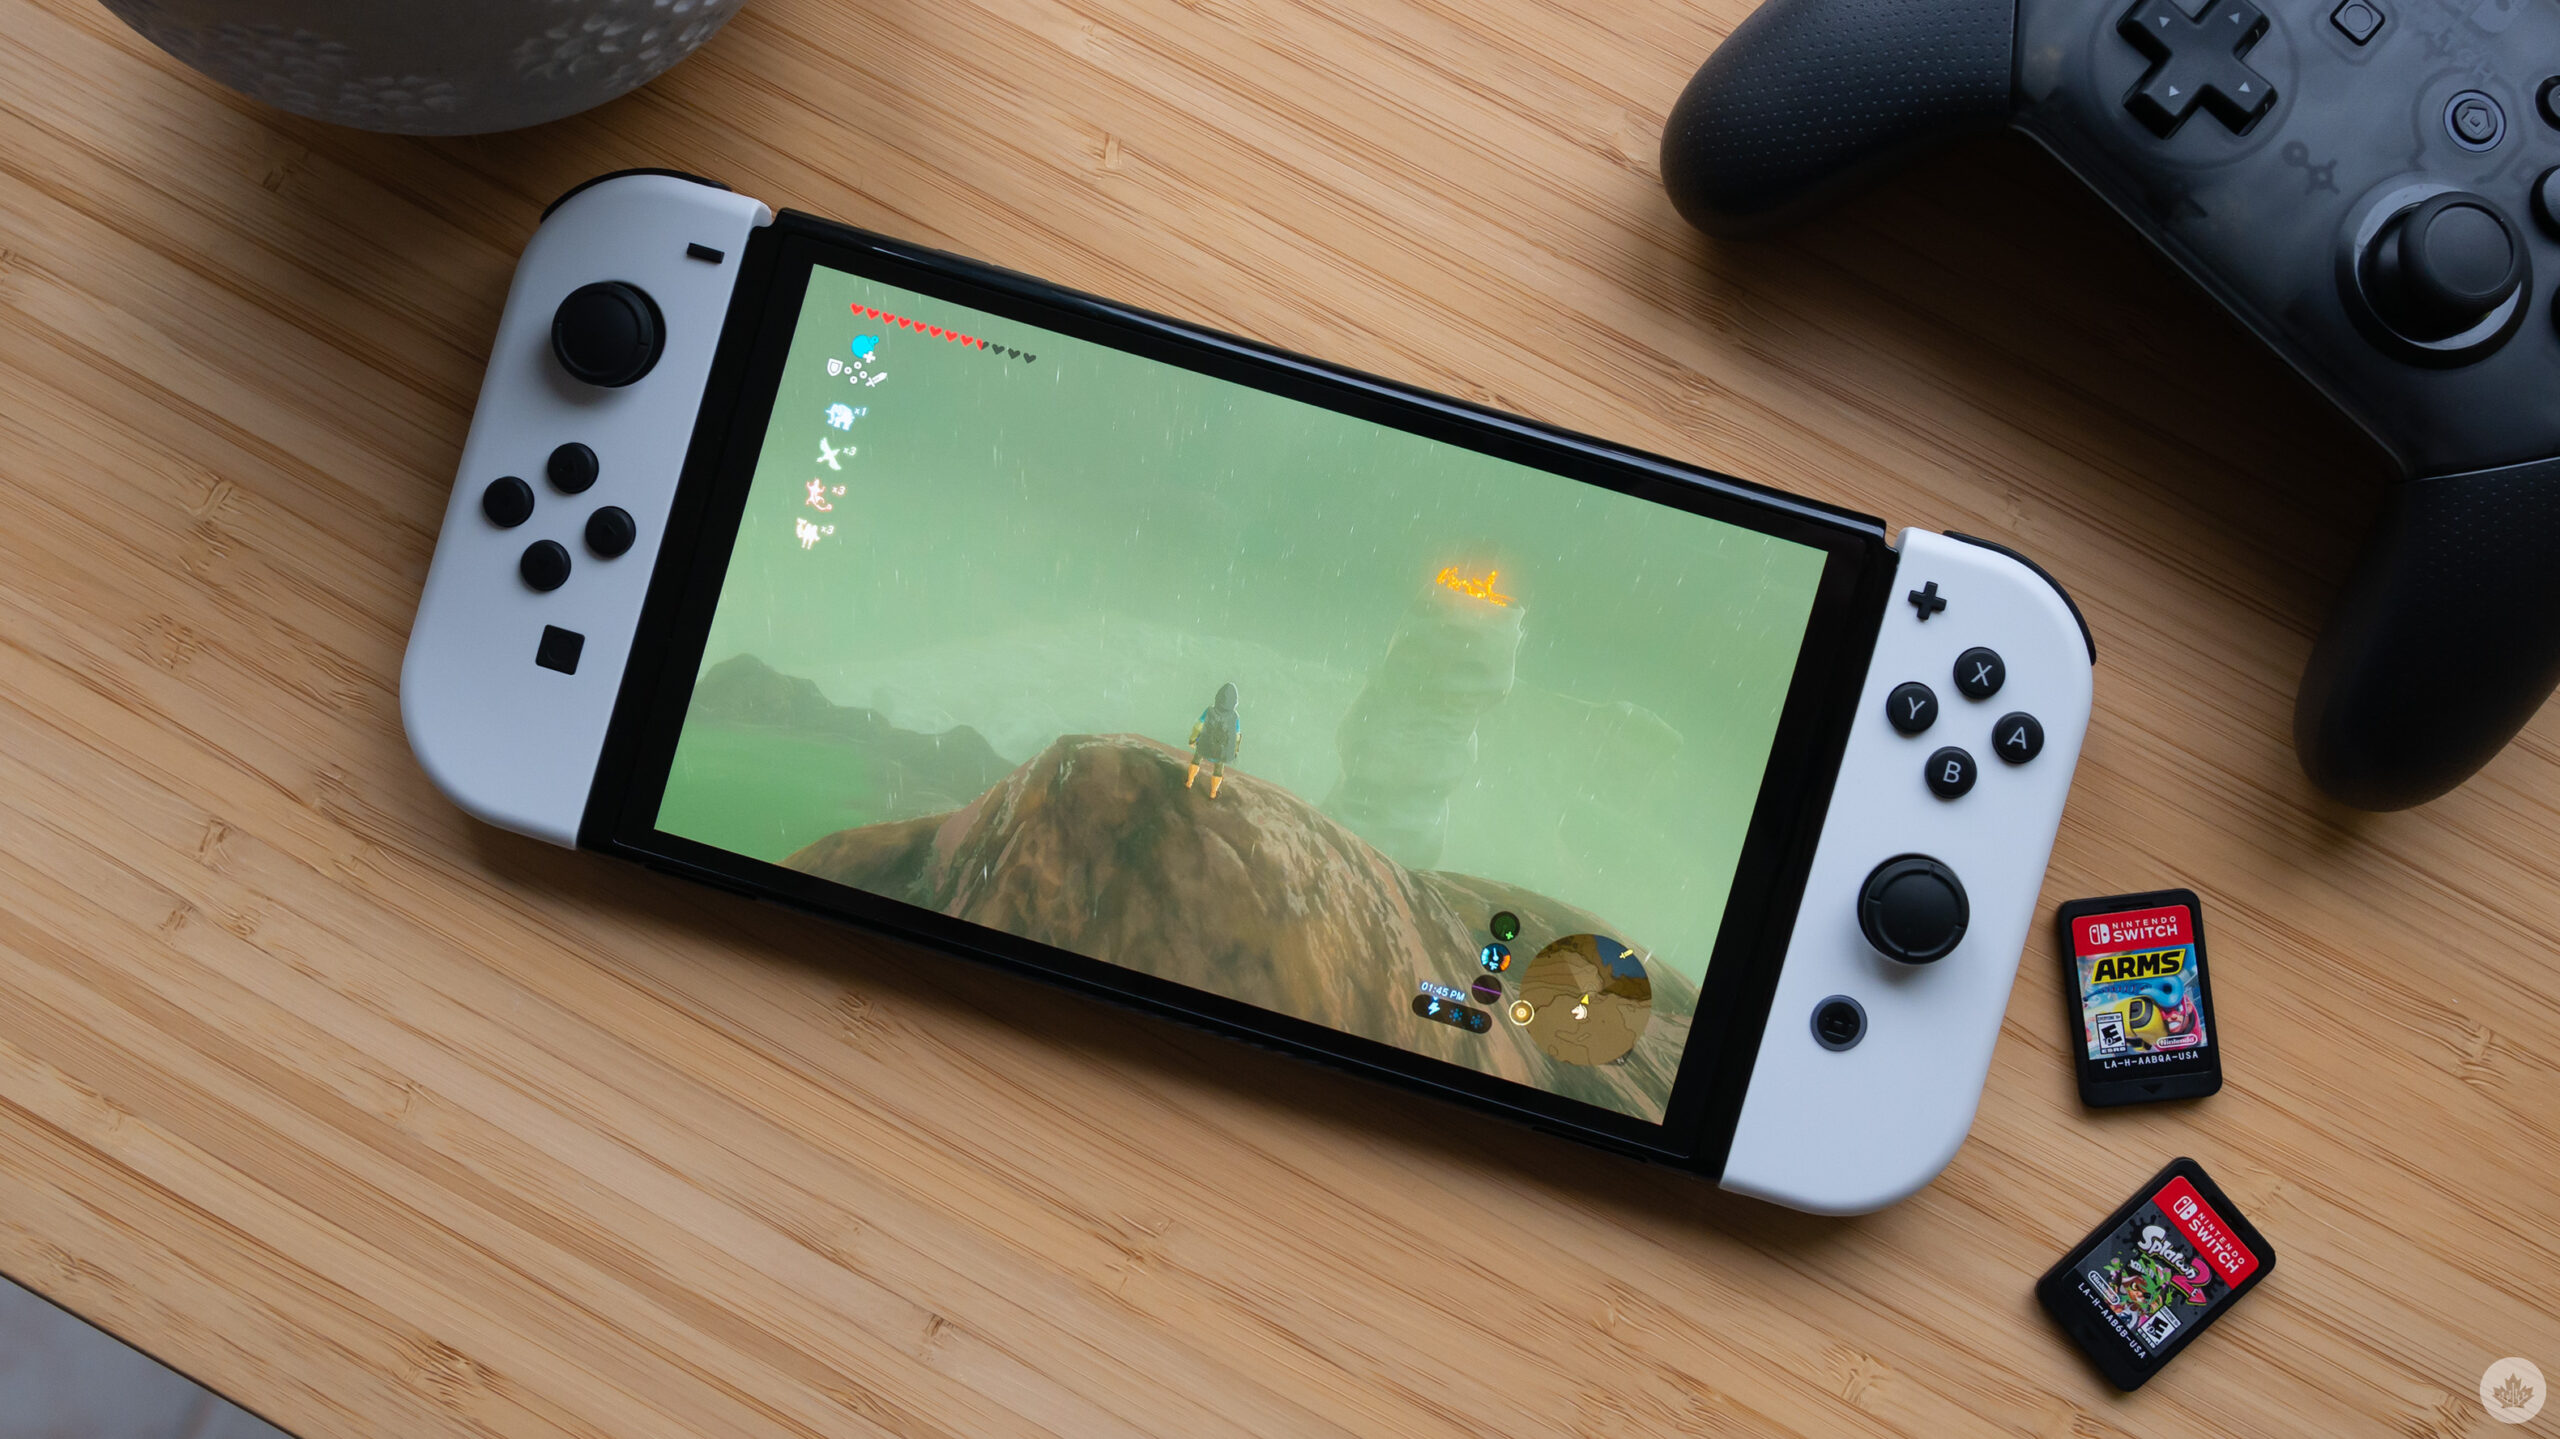 Nintendo Switch 2 looks like it will get an LCD screen — here's